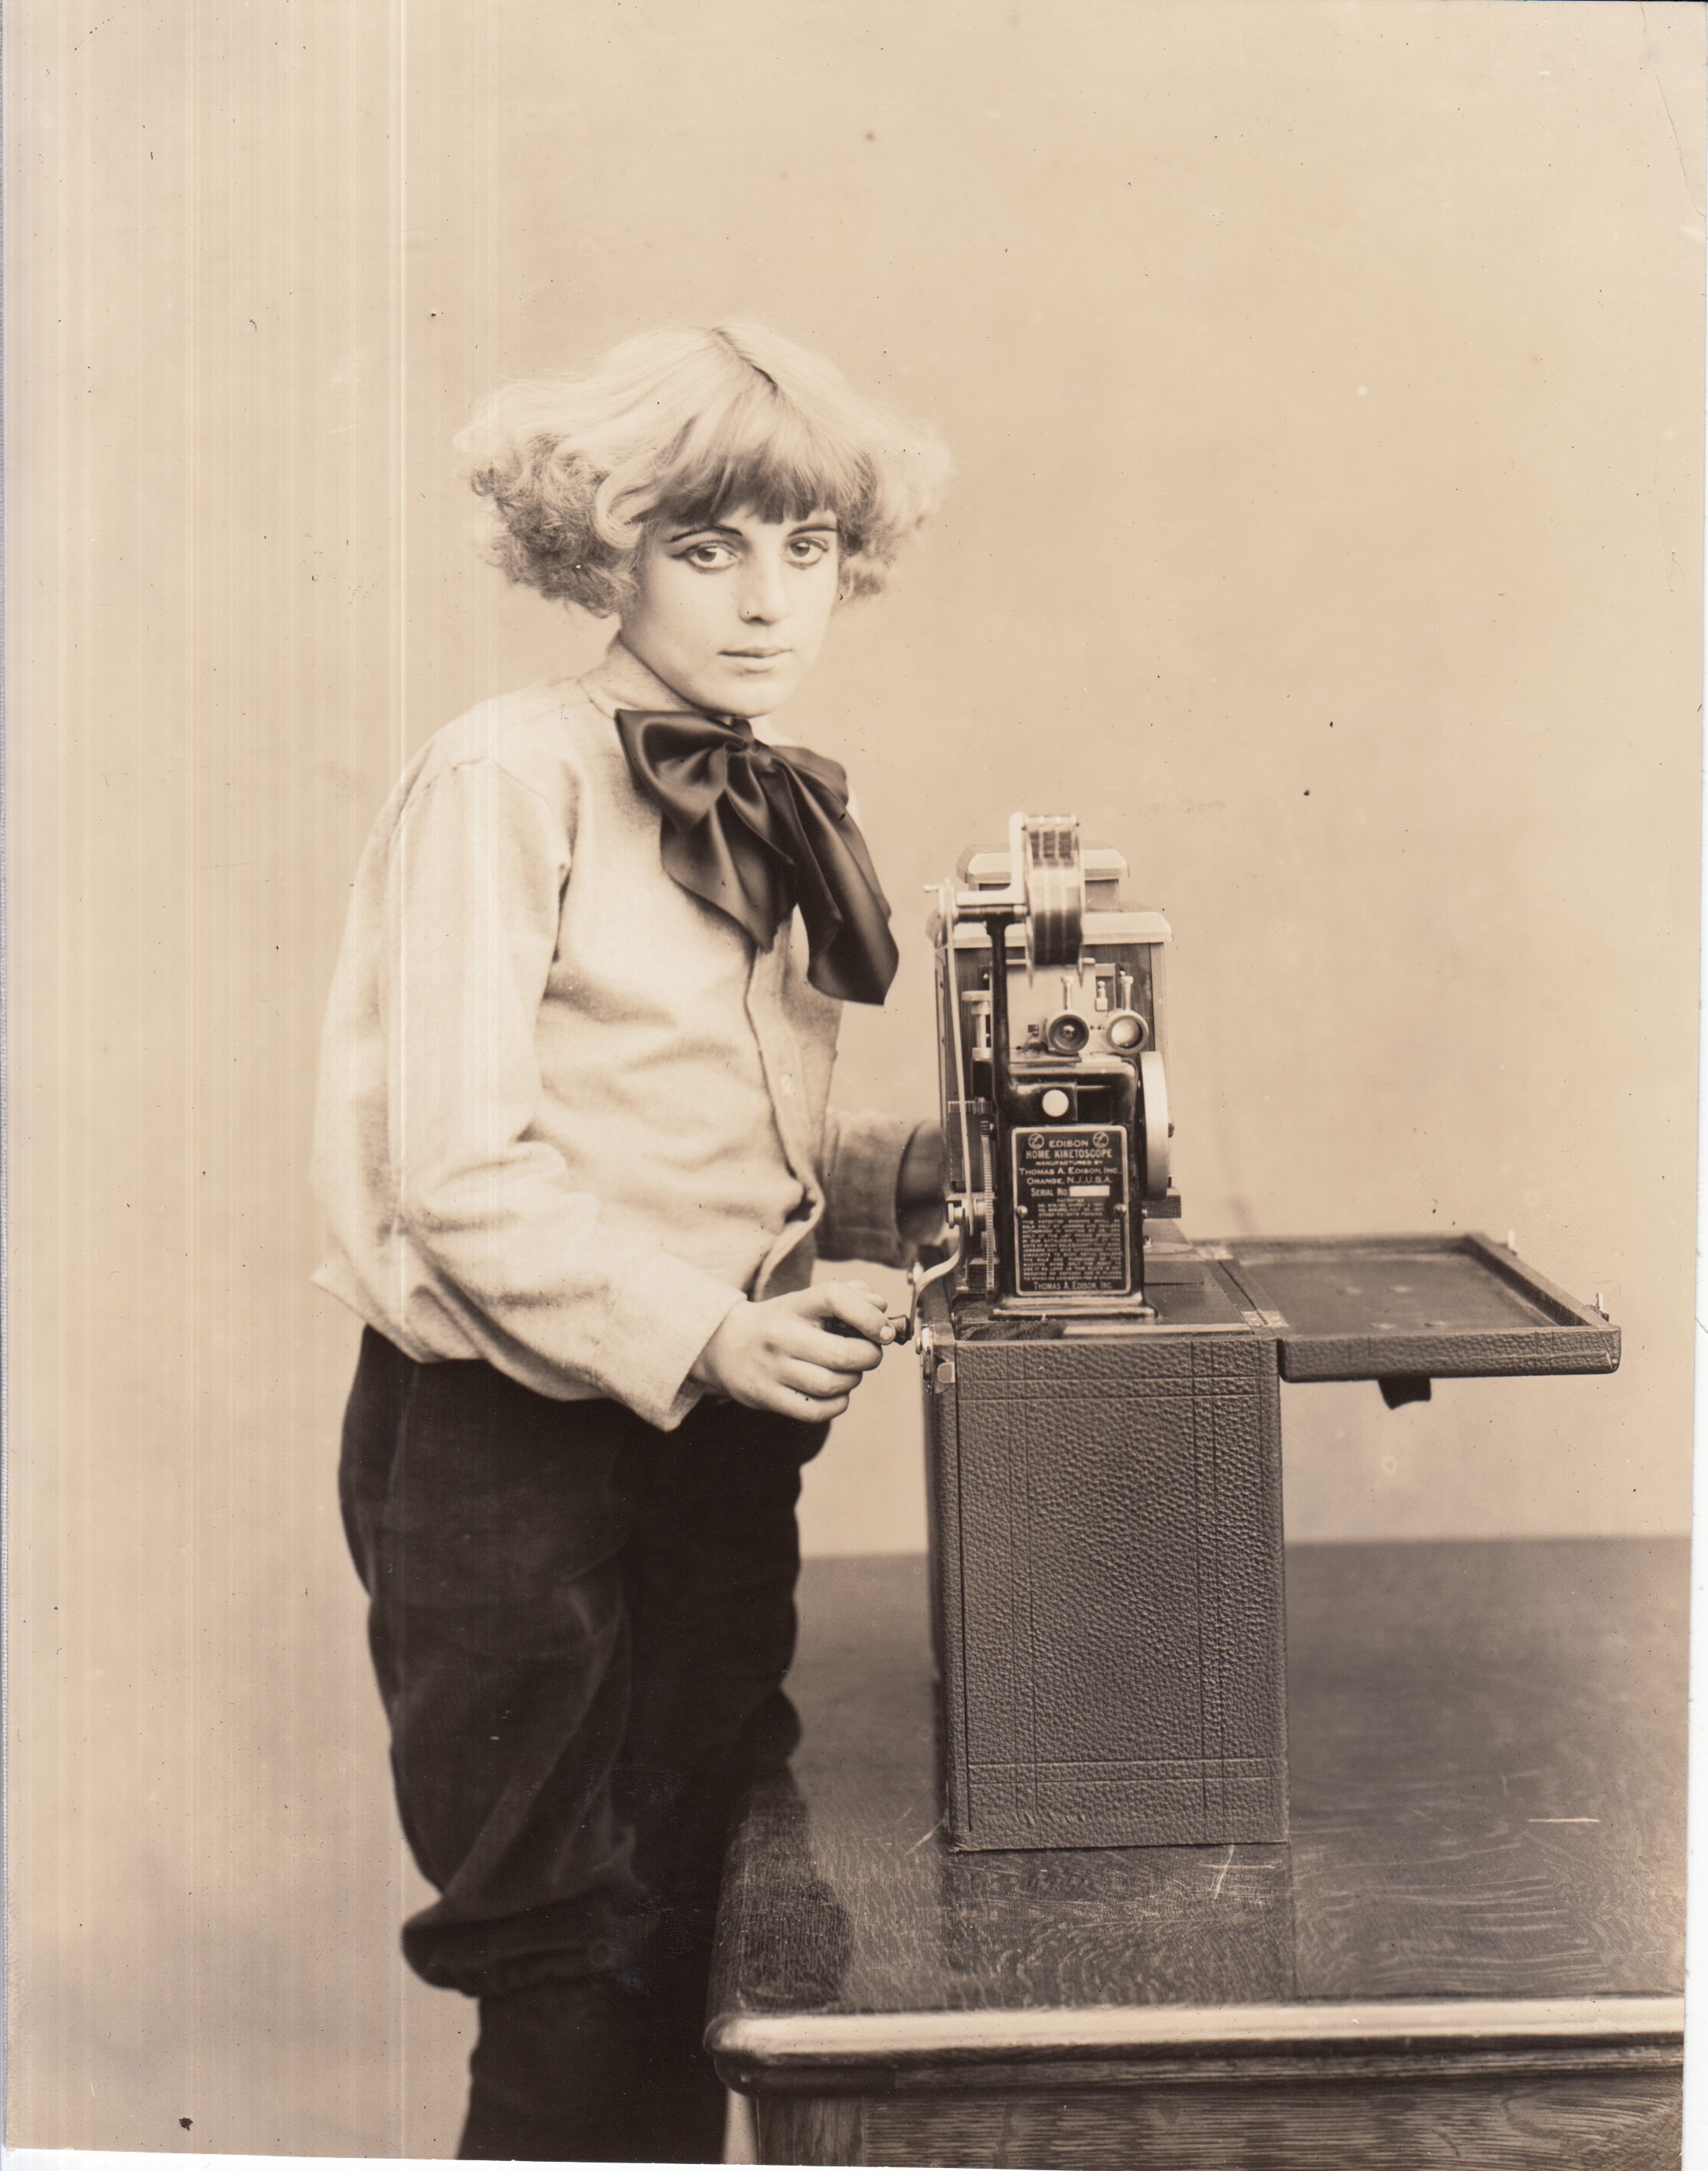 Publicity shot, girl with Edison home projecting kinetoscope.